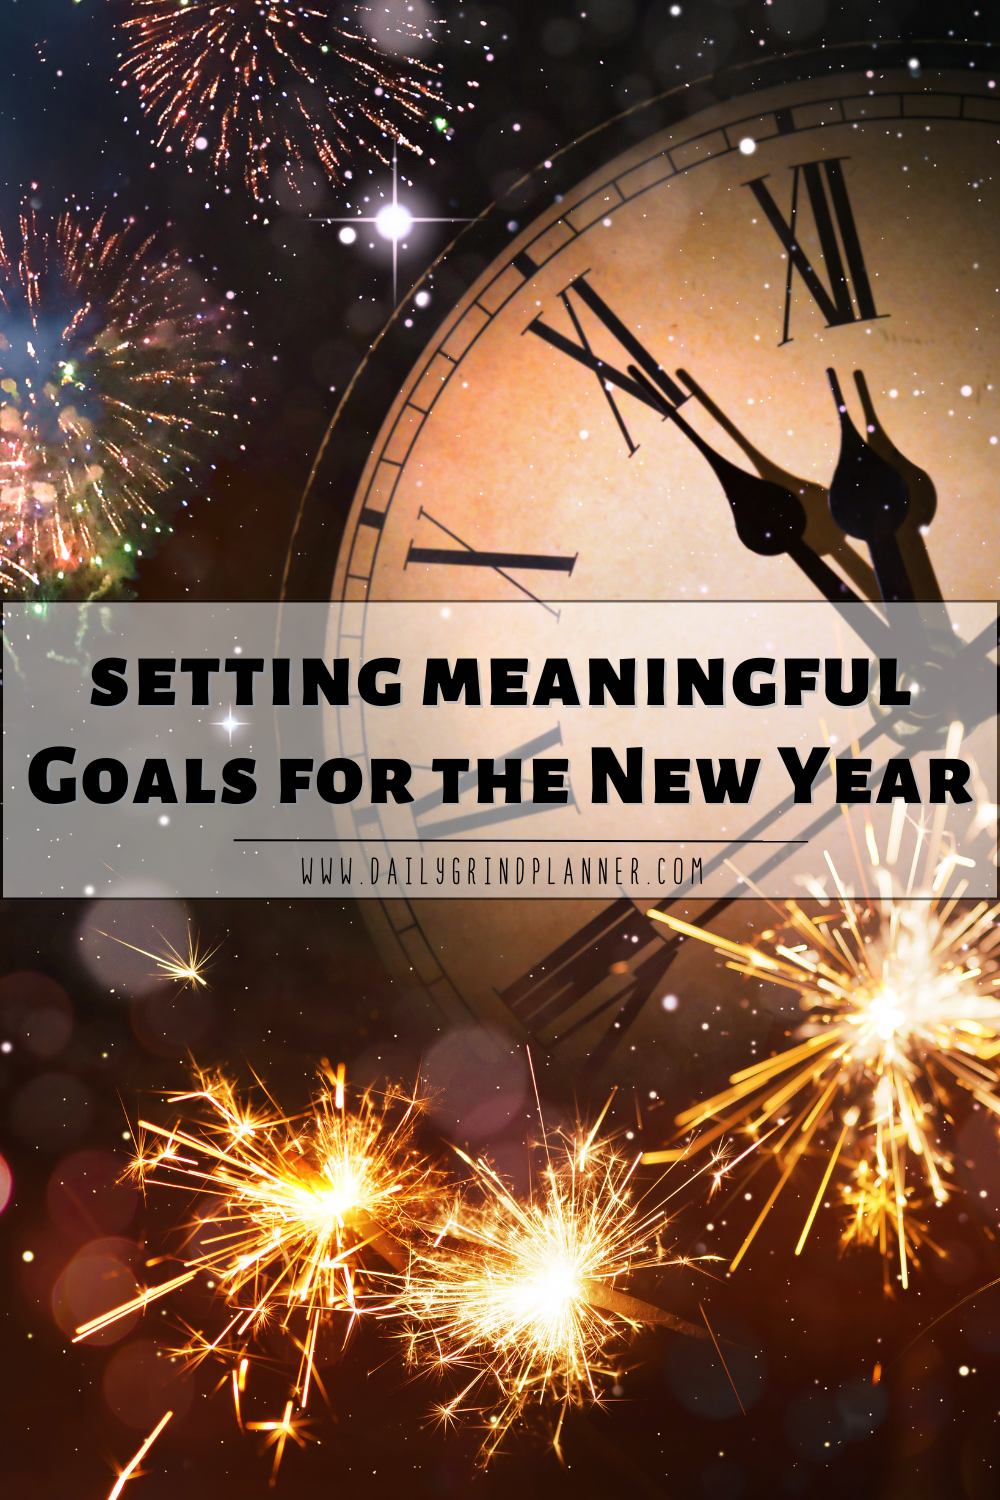 Clock face with fireworks surrounding it, with text in front that says "Setting Meaningful Goals for the New Year"